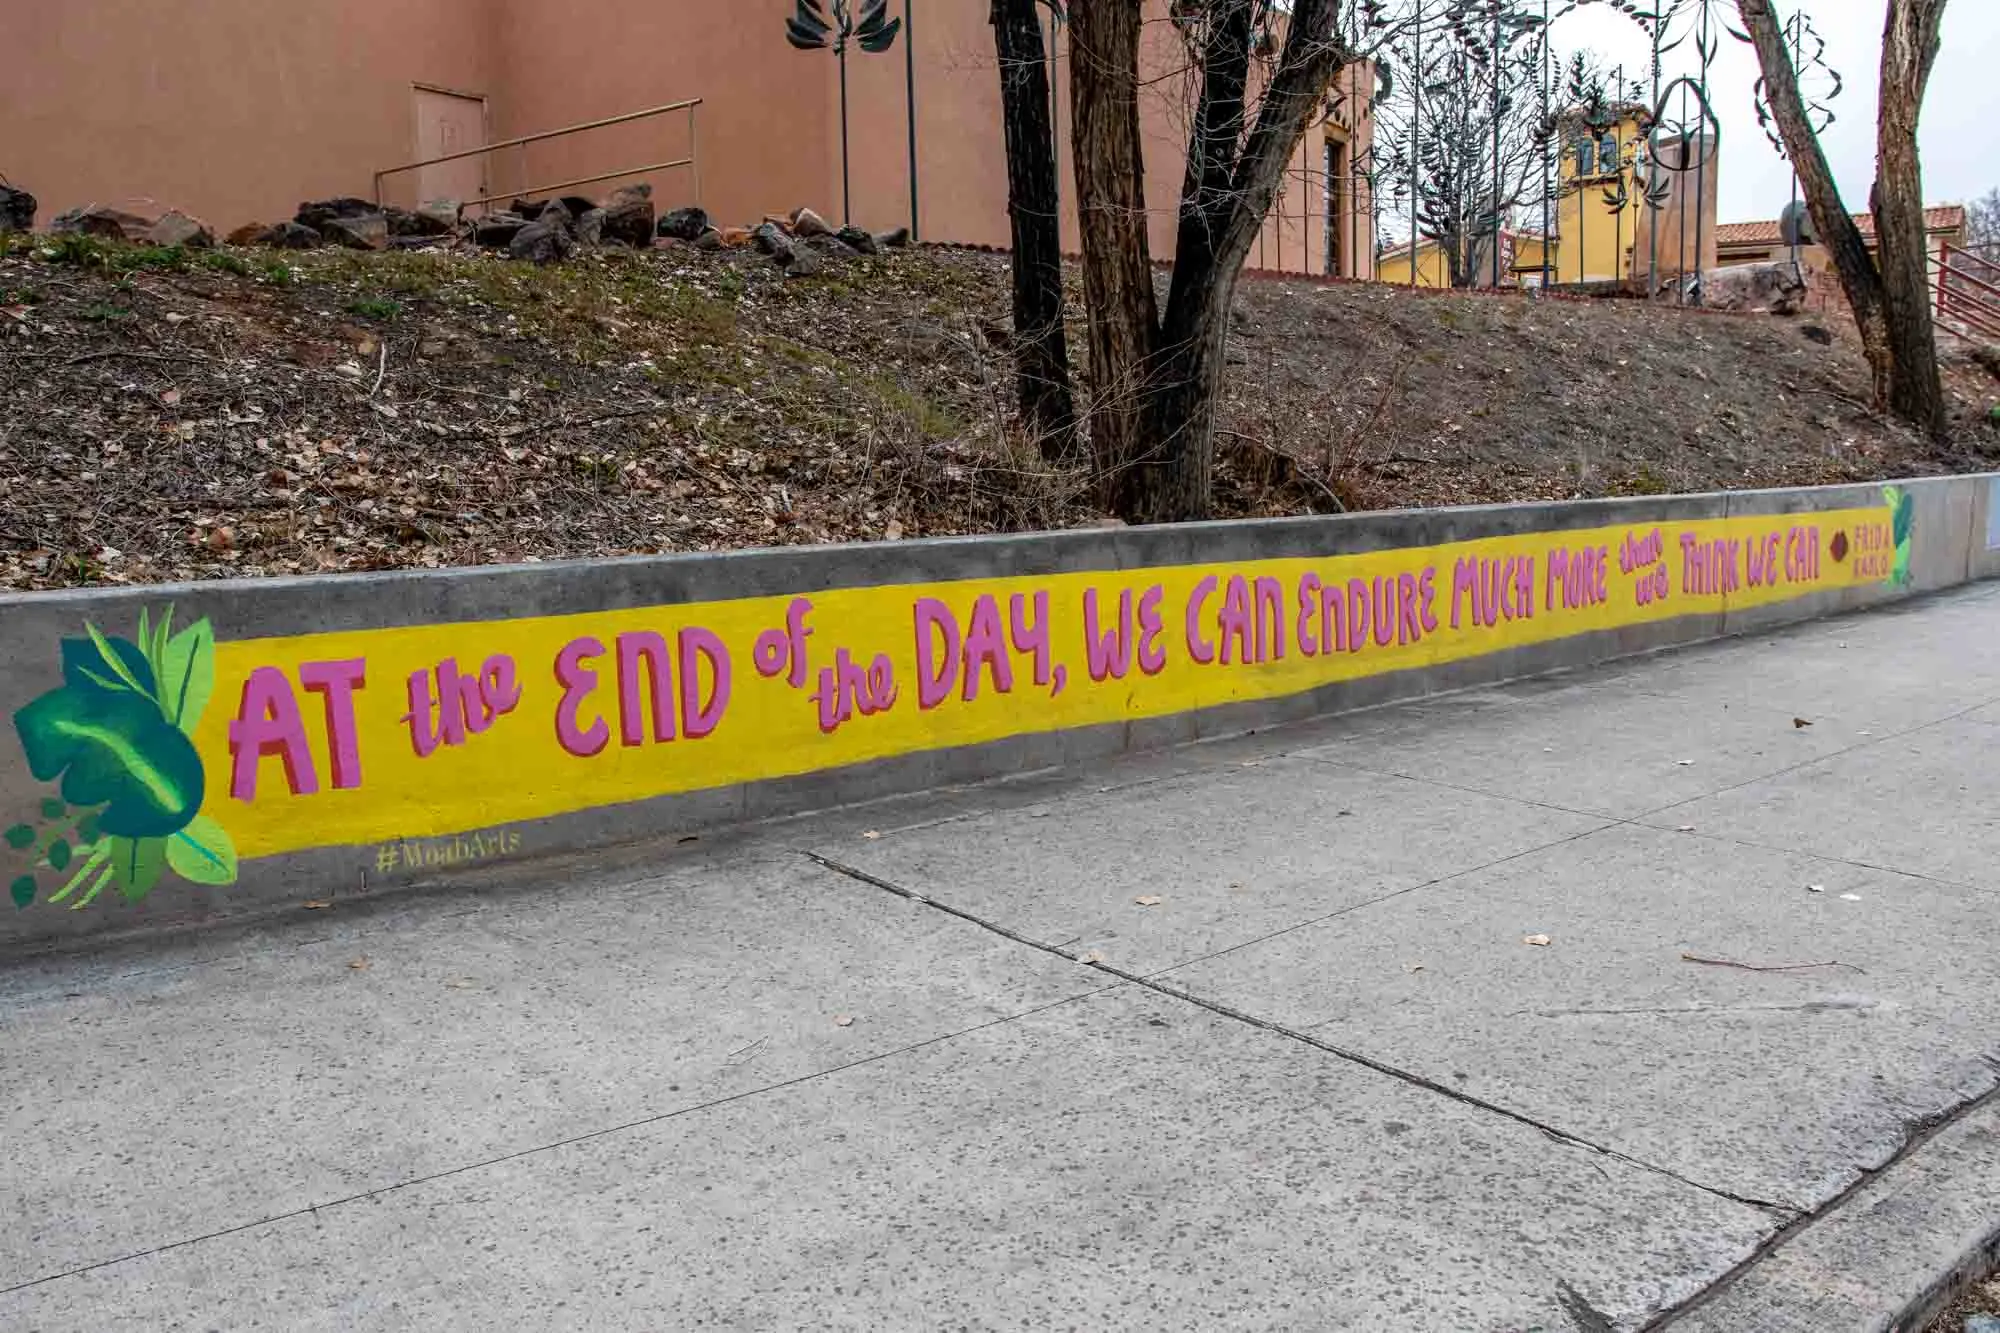 Mural on sidewalk with quote by Frida Kahlo that says, "At the end of the day, we can endure much more than we think we can."